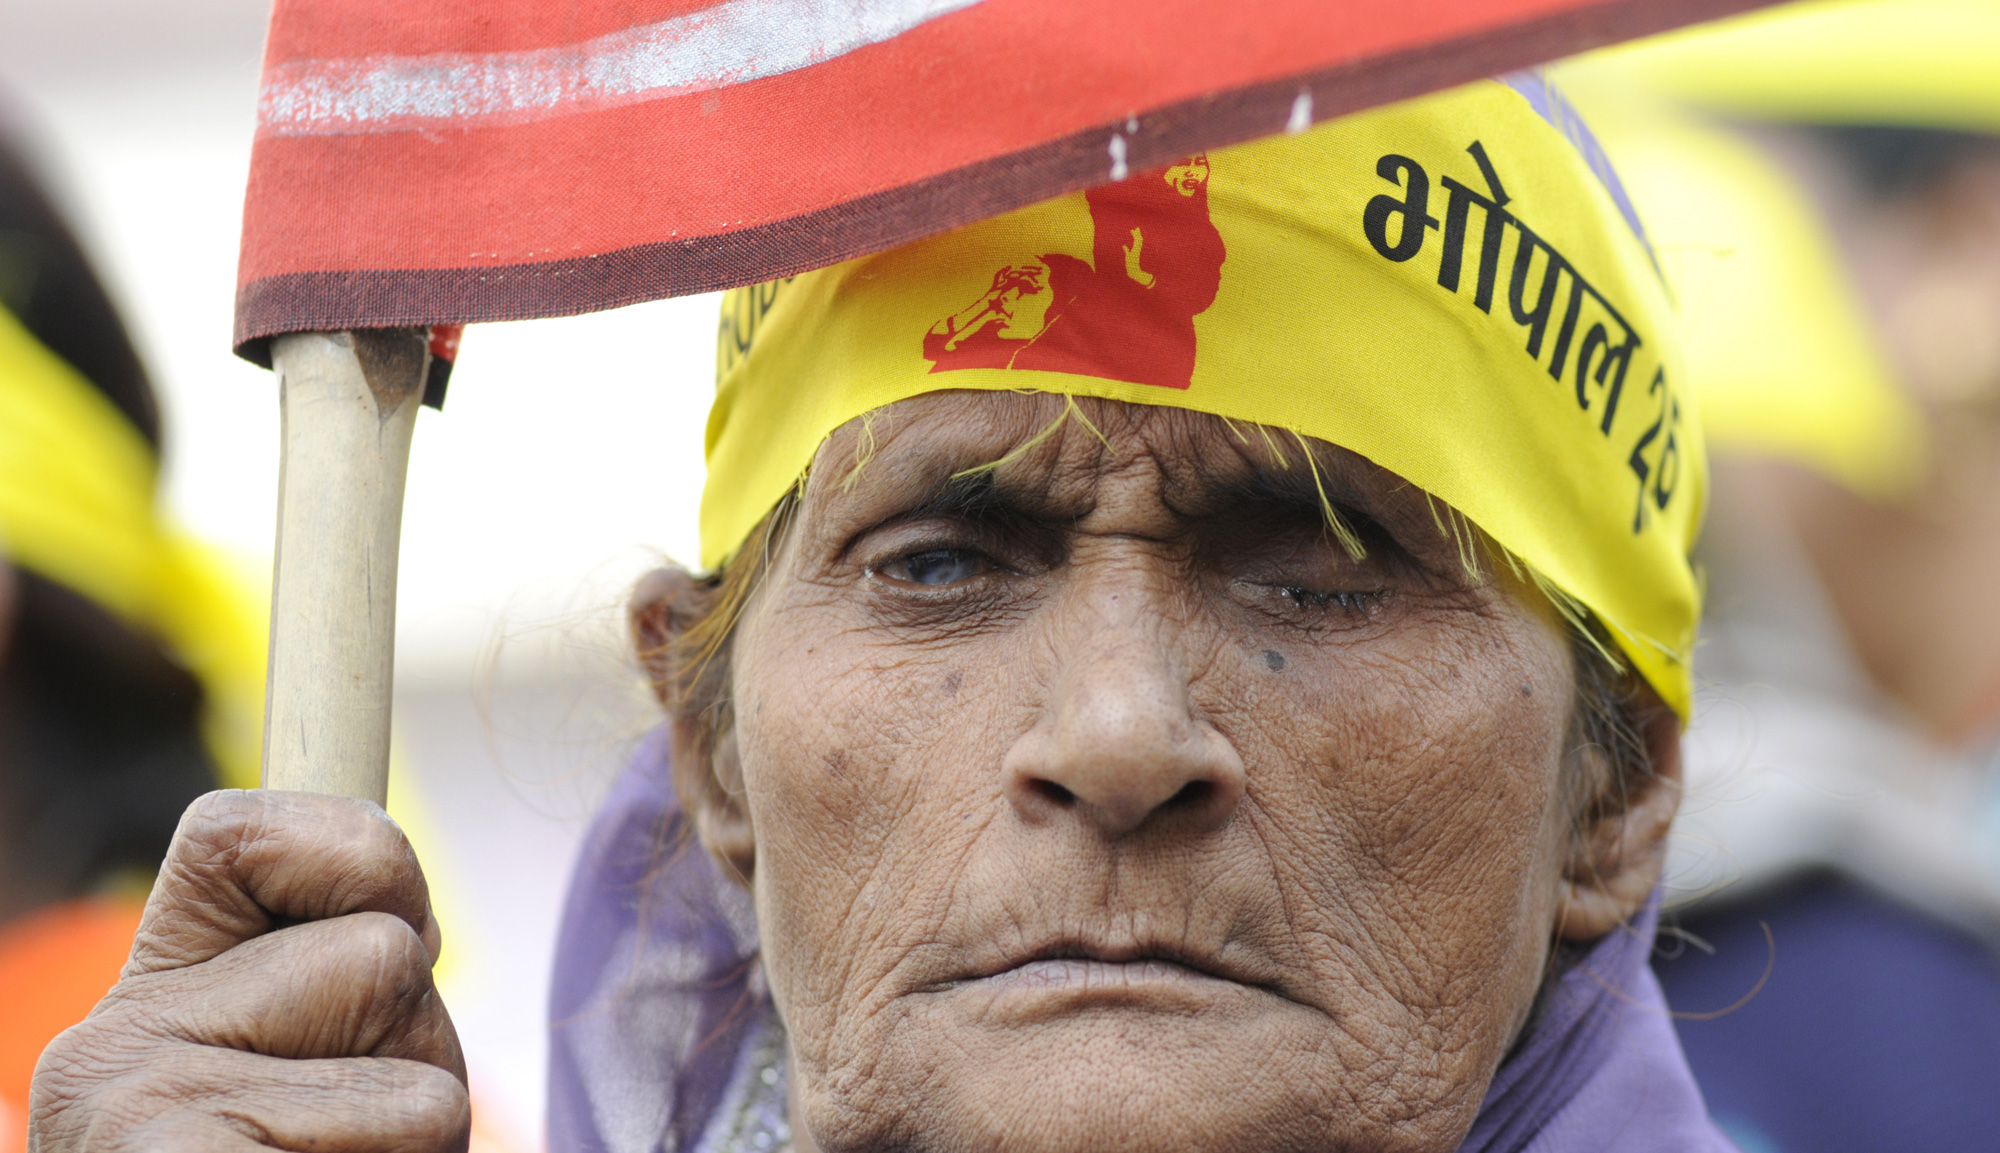 A survivor who lost her family and eyesight, attends a rally to mark the 26th year of the Bhopal gas disaster in Bhopal in 2010. The Bhopal Museum, an ode to the creativity of the survivors, does not see resistance terminally but as an invitation to future defiance